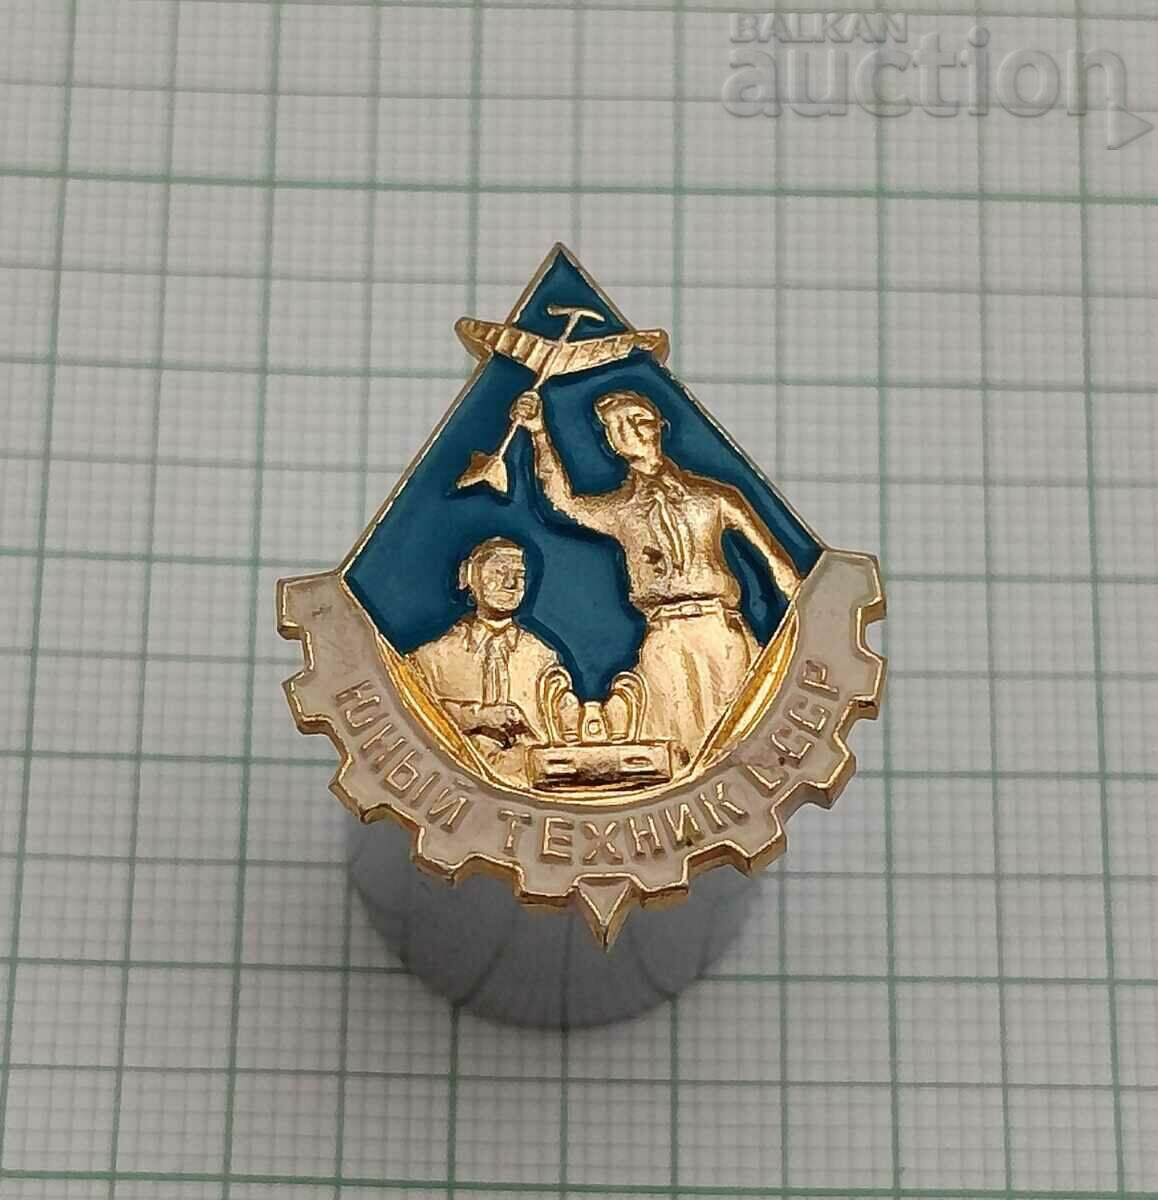 YOUNG TECHNICIAN USSR BADGE